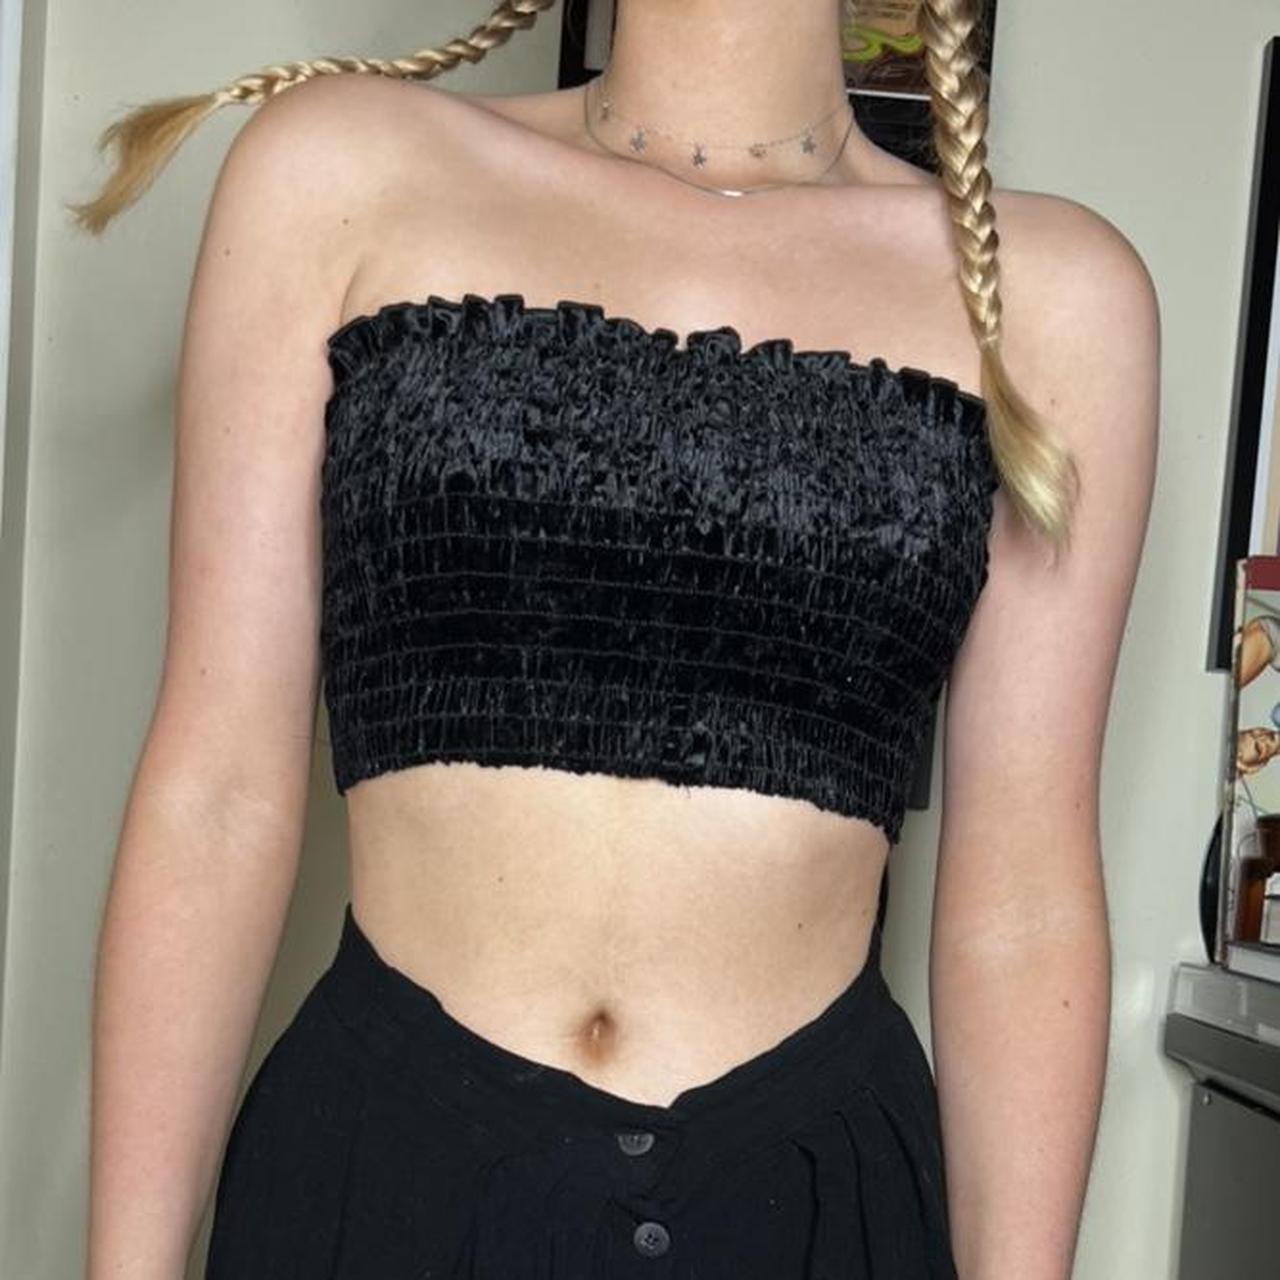 LOUIS VUITTON Tube Top. Has a 90s feel and is super - Depop